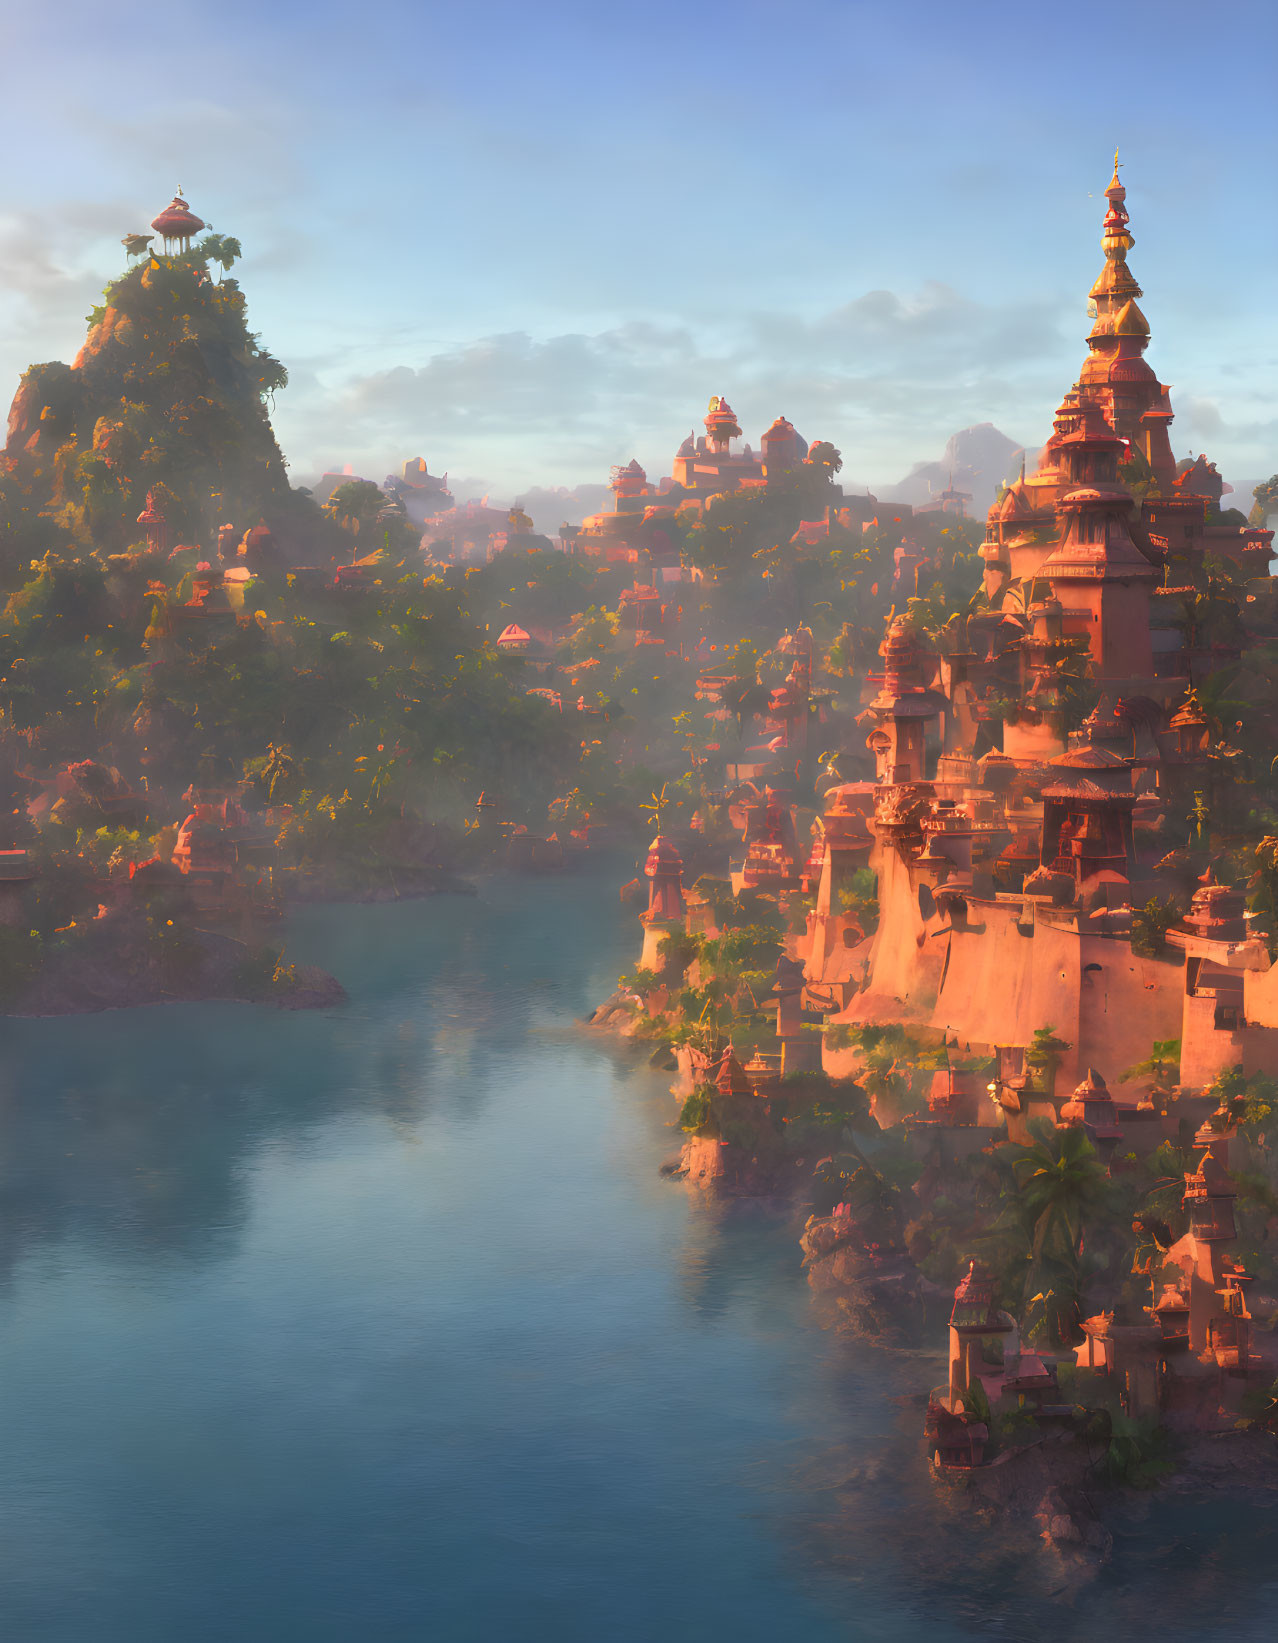 Mythical city with ornate temples and lush greenery at sunrise